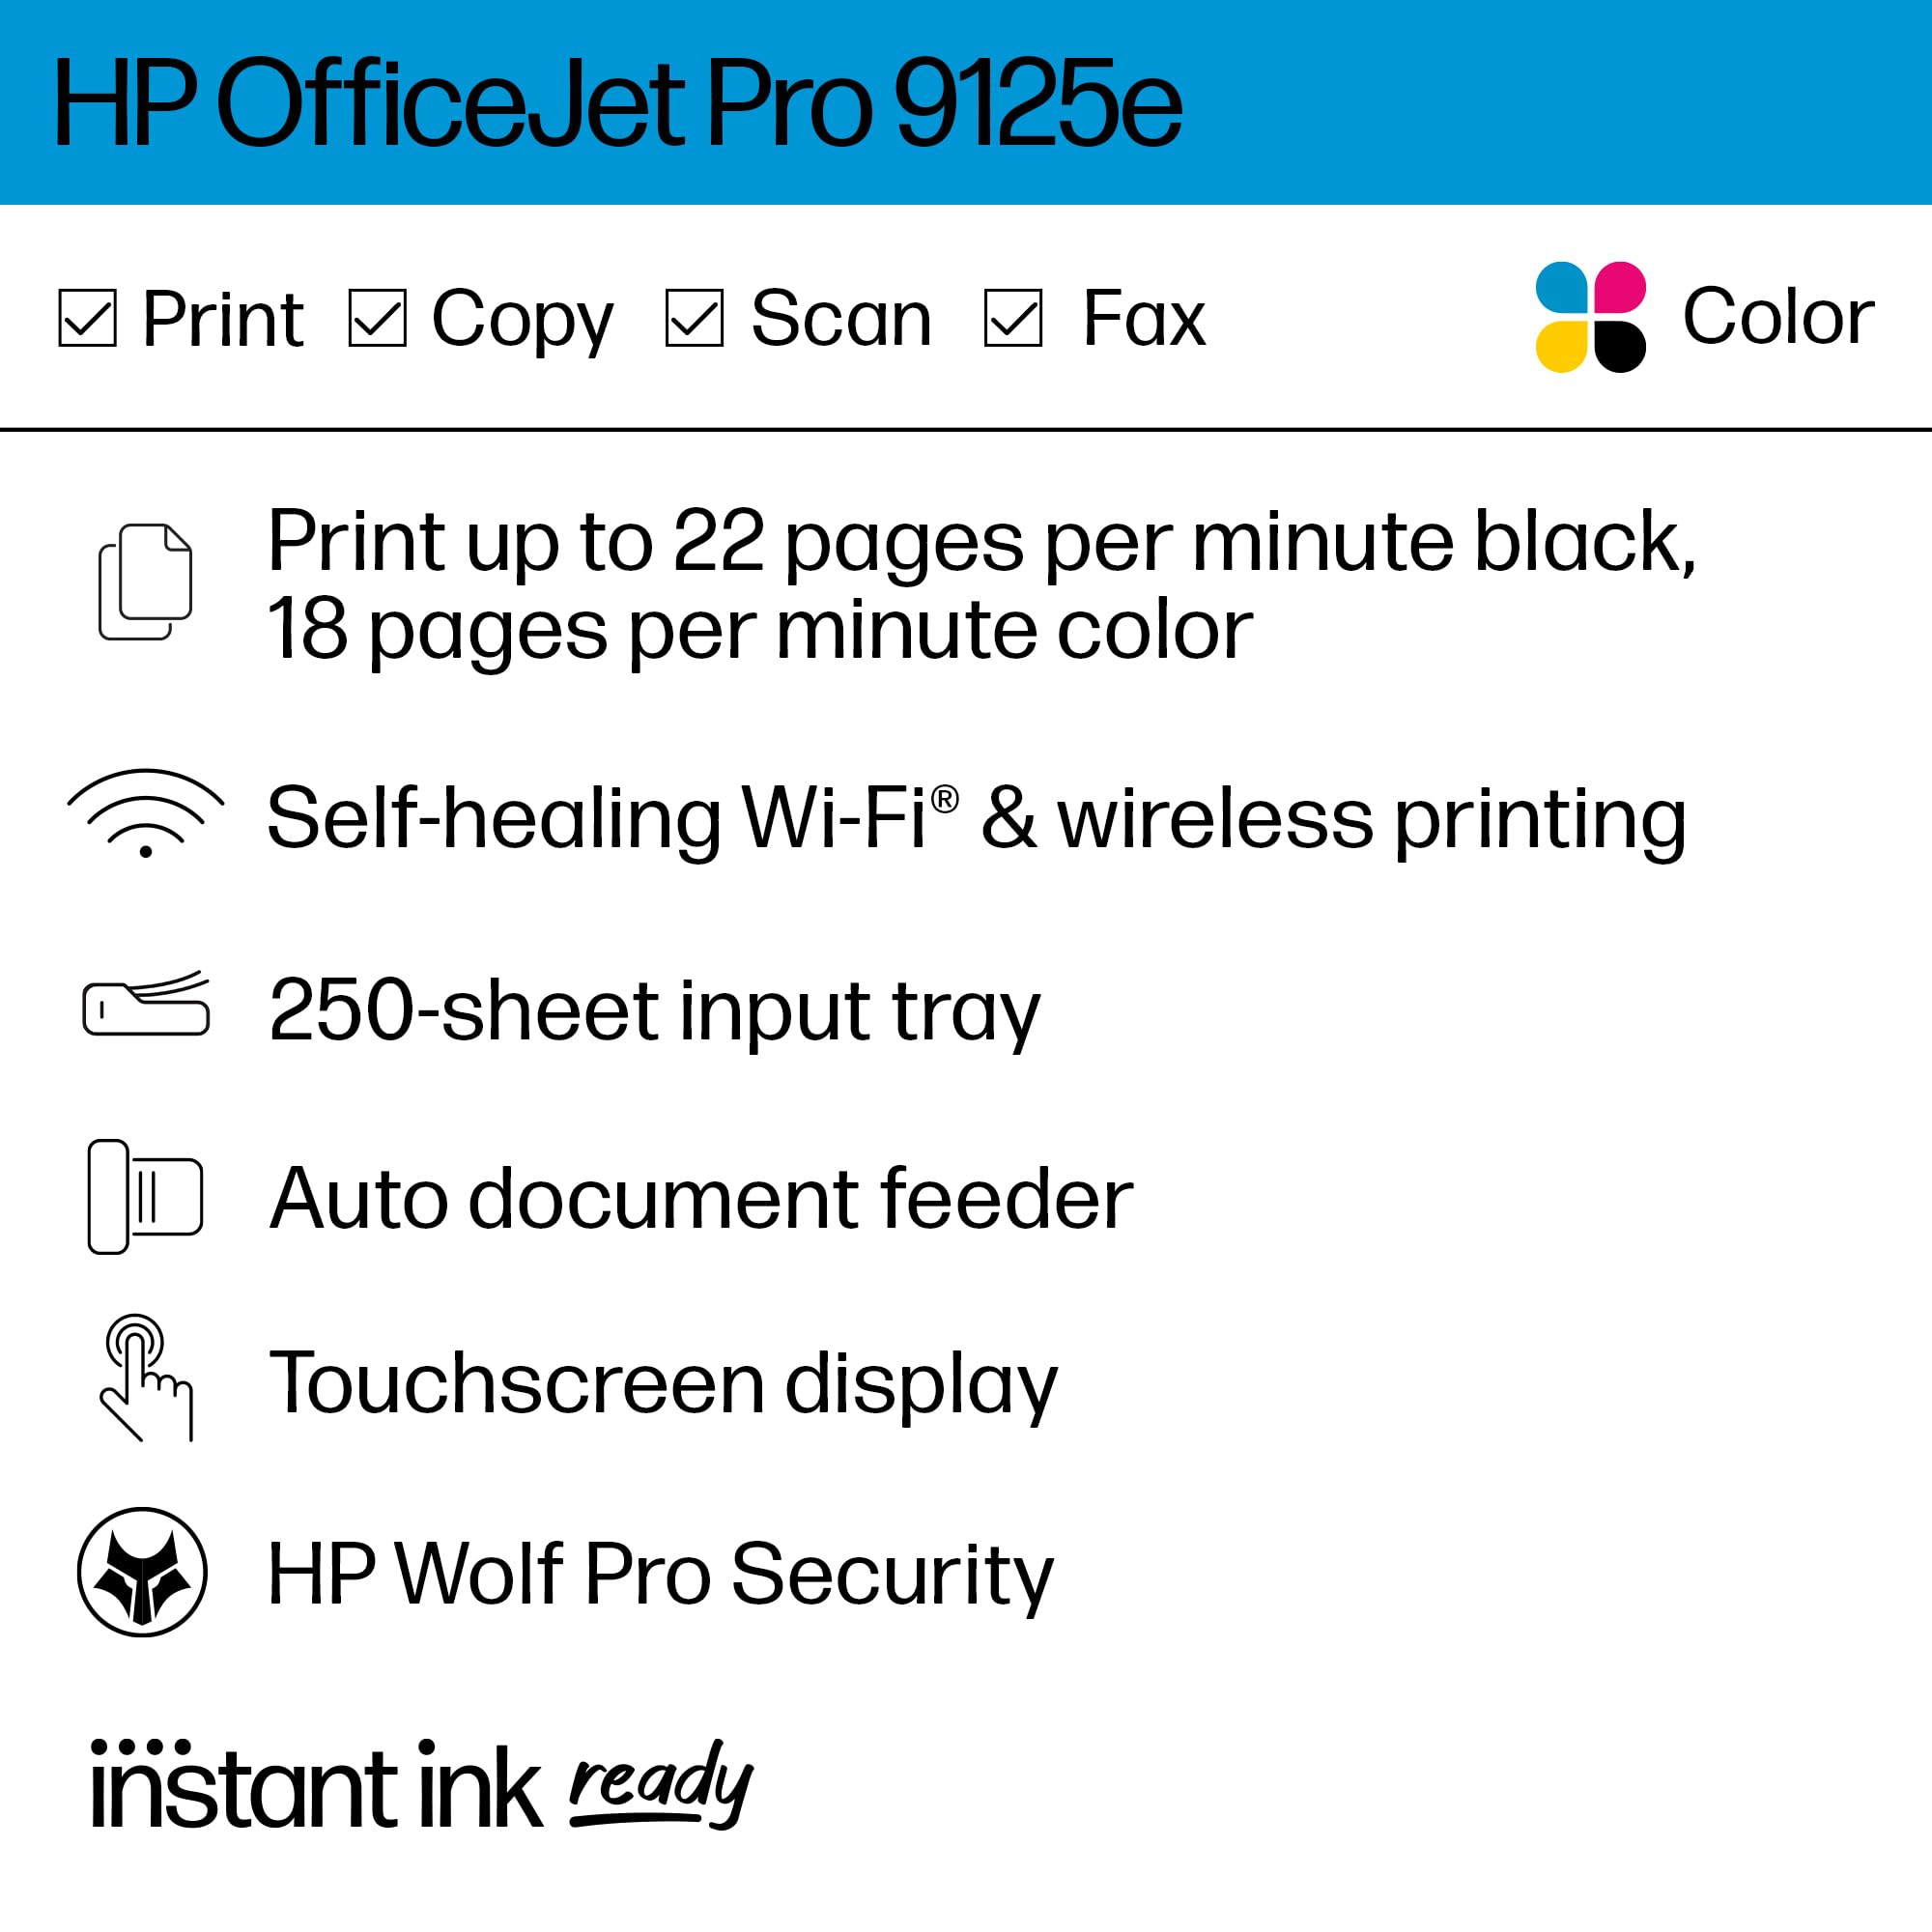 HP OfficeJet Pro 9125e Wireless All-in-One Color Inkjet Printer, Print, scan, Copy, fax, ADF, Duplex Printing Best for Office, 3 Months of Ink Included (403X0A)